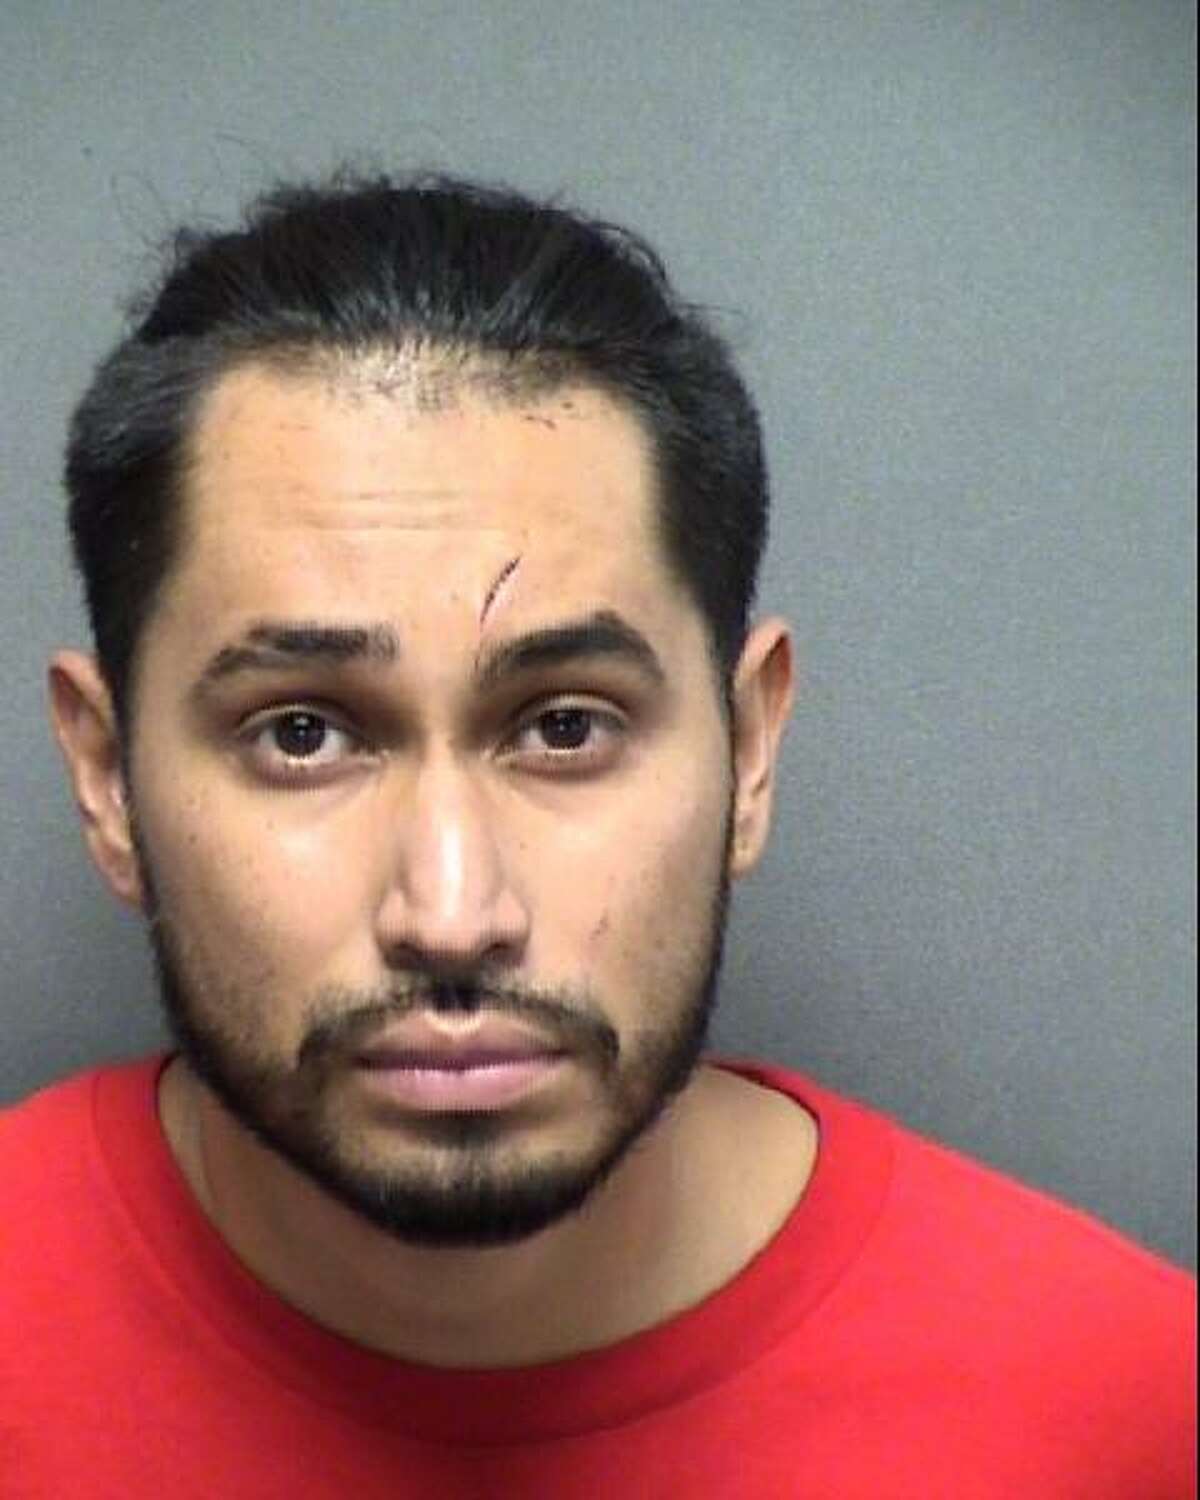 Francisco Javier Garcia Ventura, 29, is charged with tampering with physical evidence in the disappearance of his girlfriend, Crystal Iris Garcia, 33. His bail is $200,000.